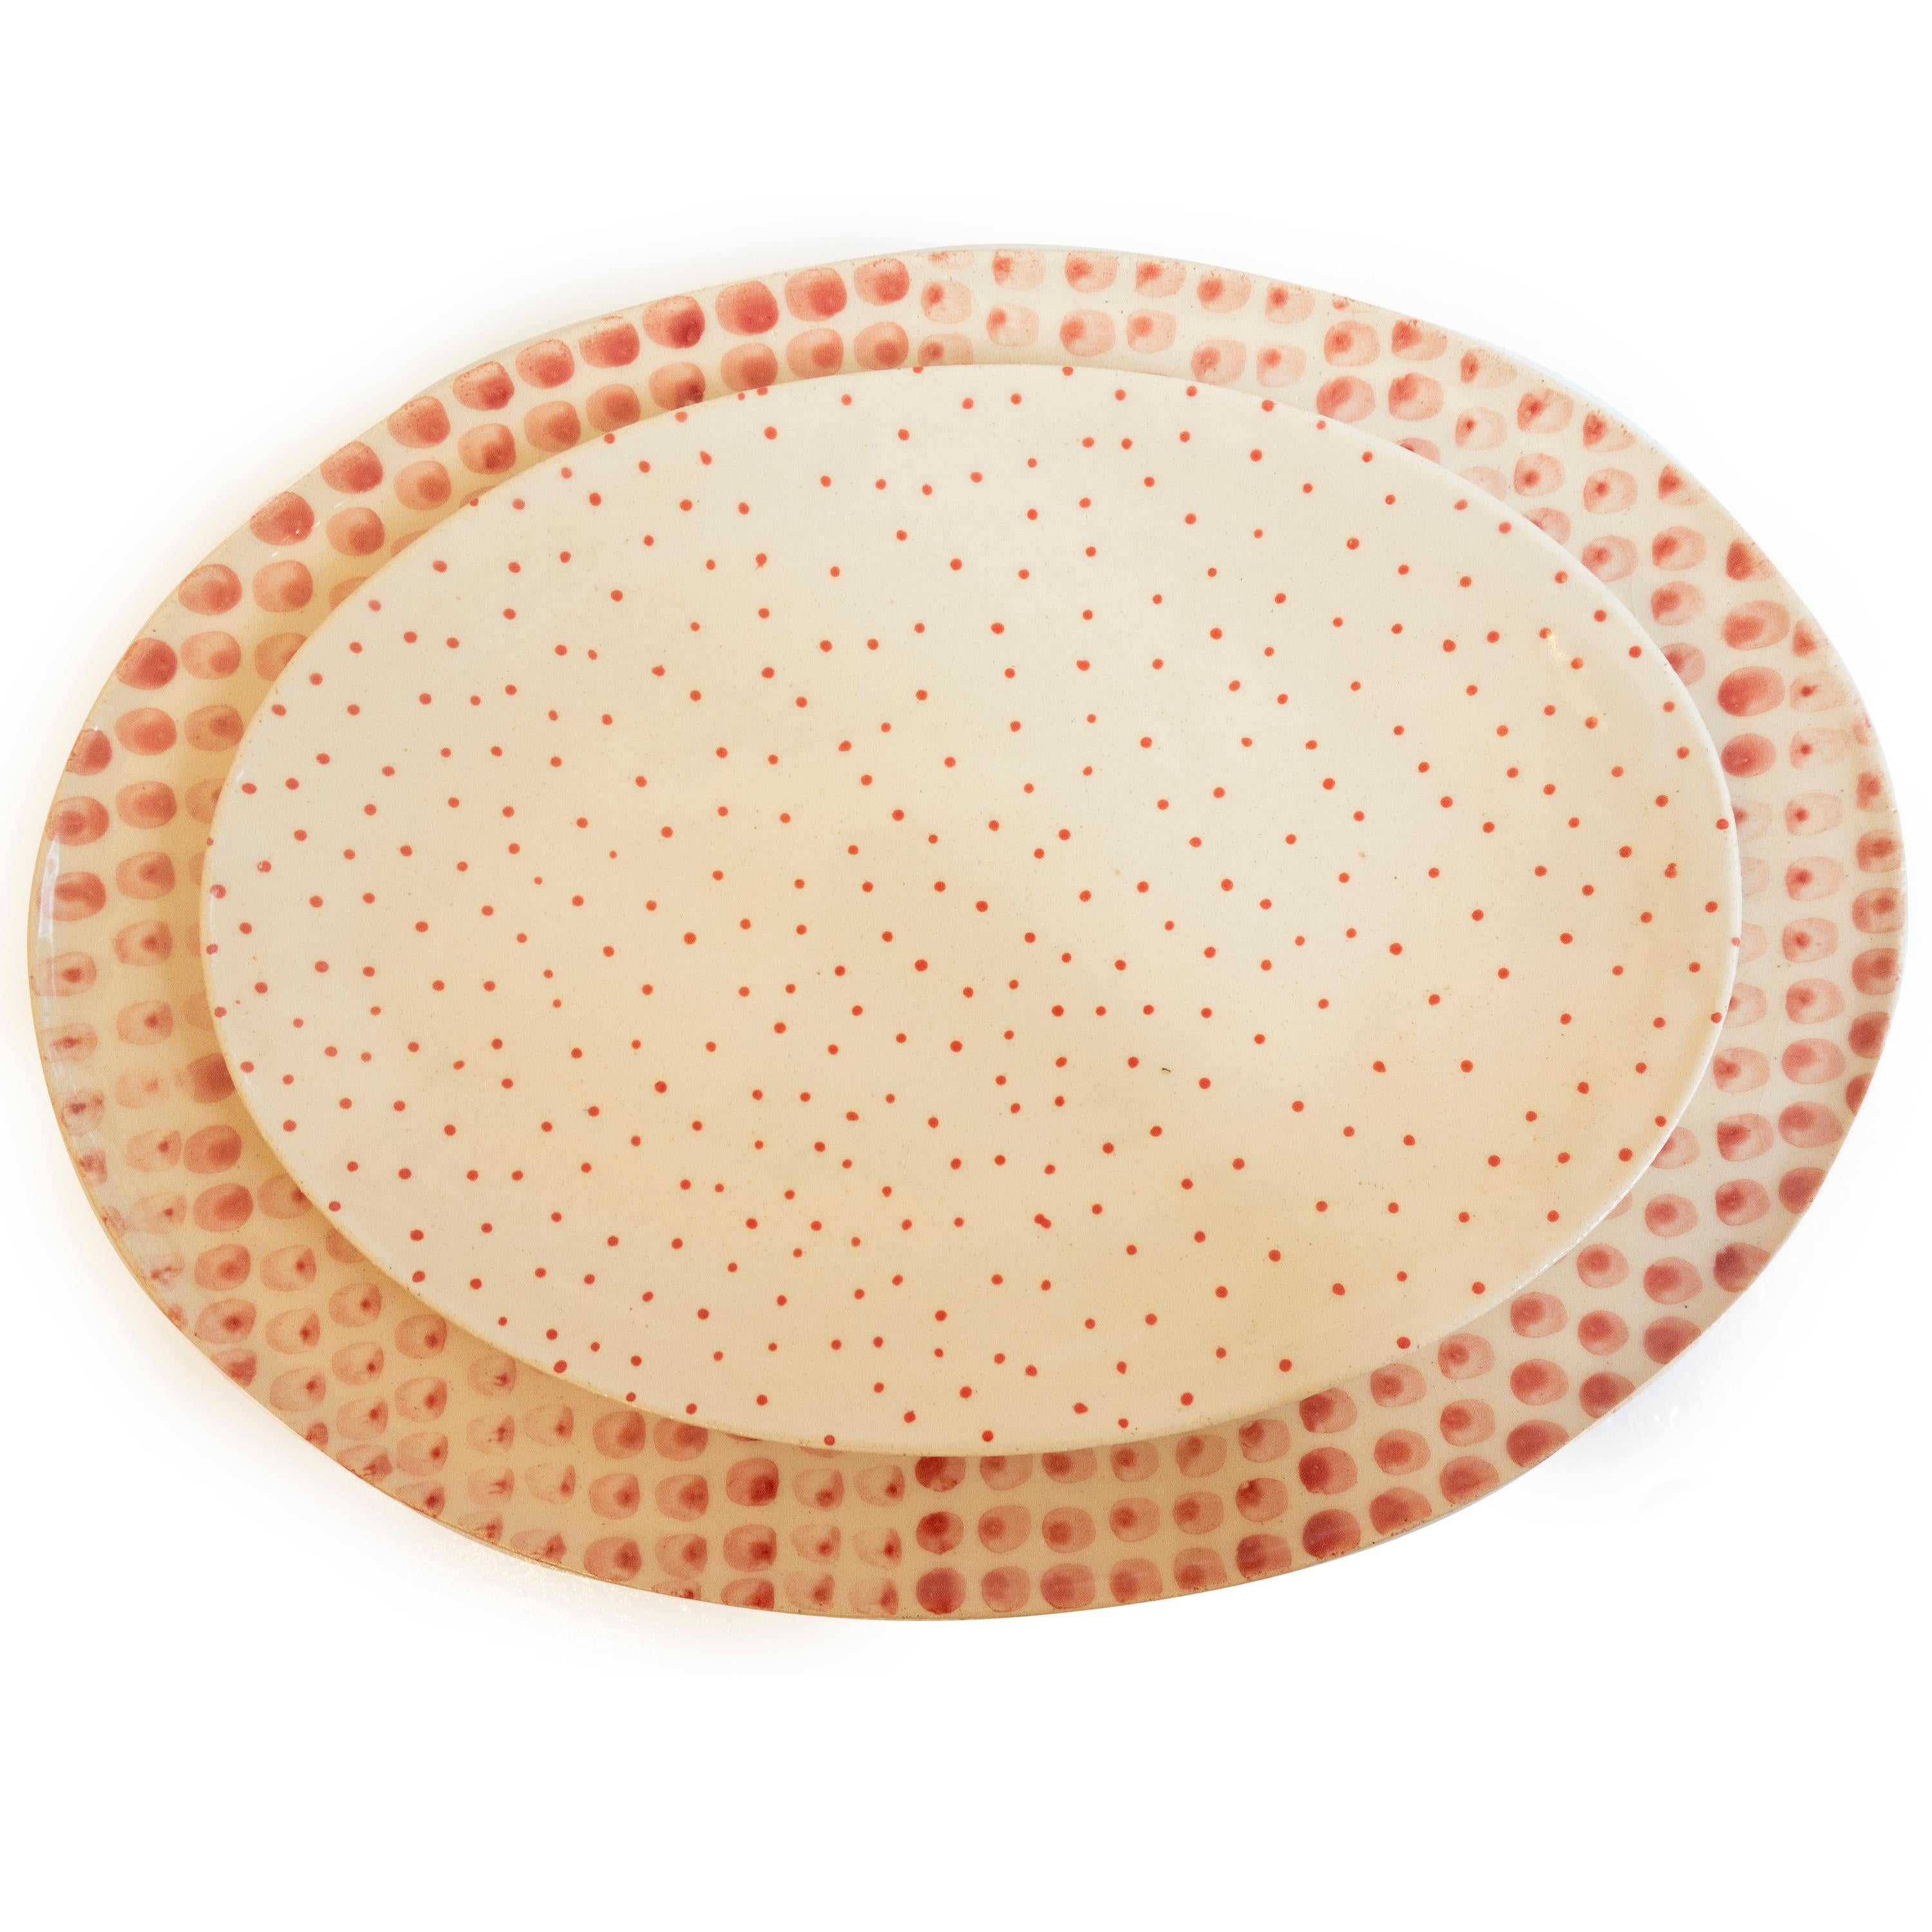 This hand crafted platter is handmade in Paris, France. From the hand beating of the clay to the drawn illustration each platter is meticulously crafted. This platter is made from natural clay resulting in slightly different hues from one piece to